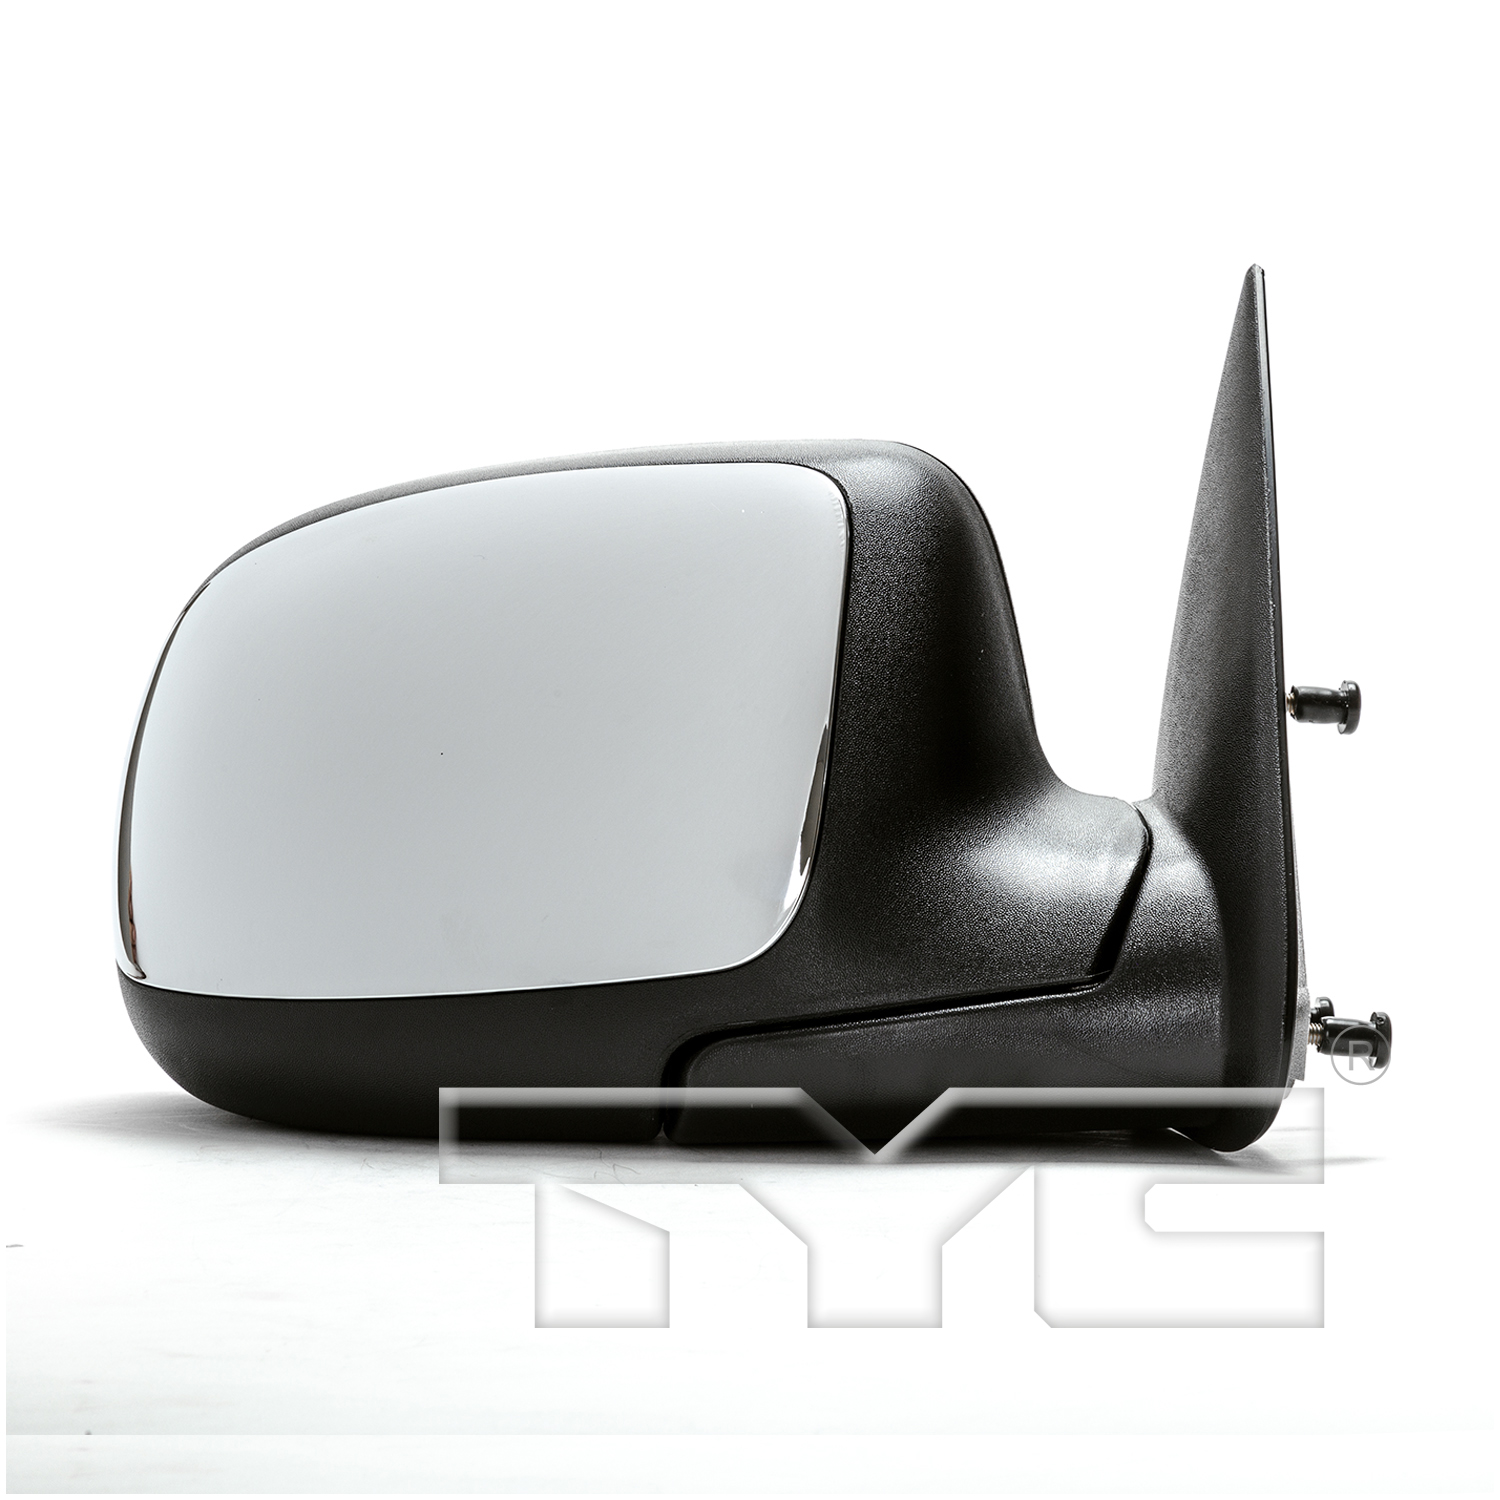 Aftermarket MIRRORS for CHEVROLET - SUBURBAN 2500, SUBURBAN 2500,00-05,RT Mirror outside rear view